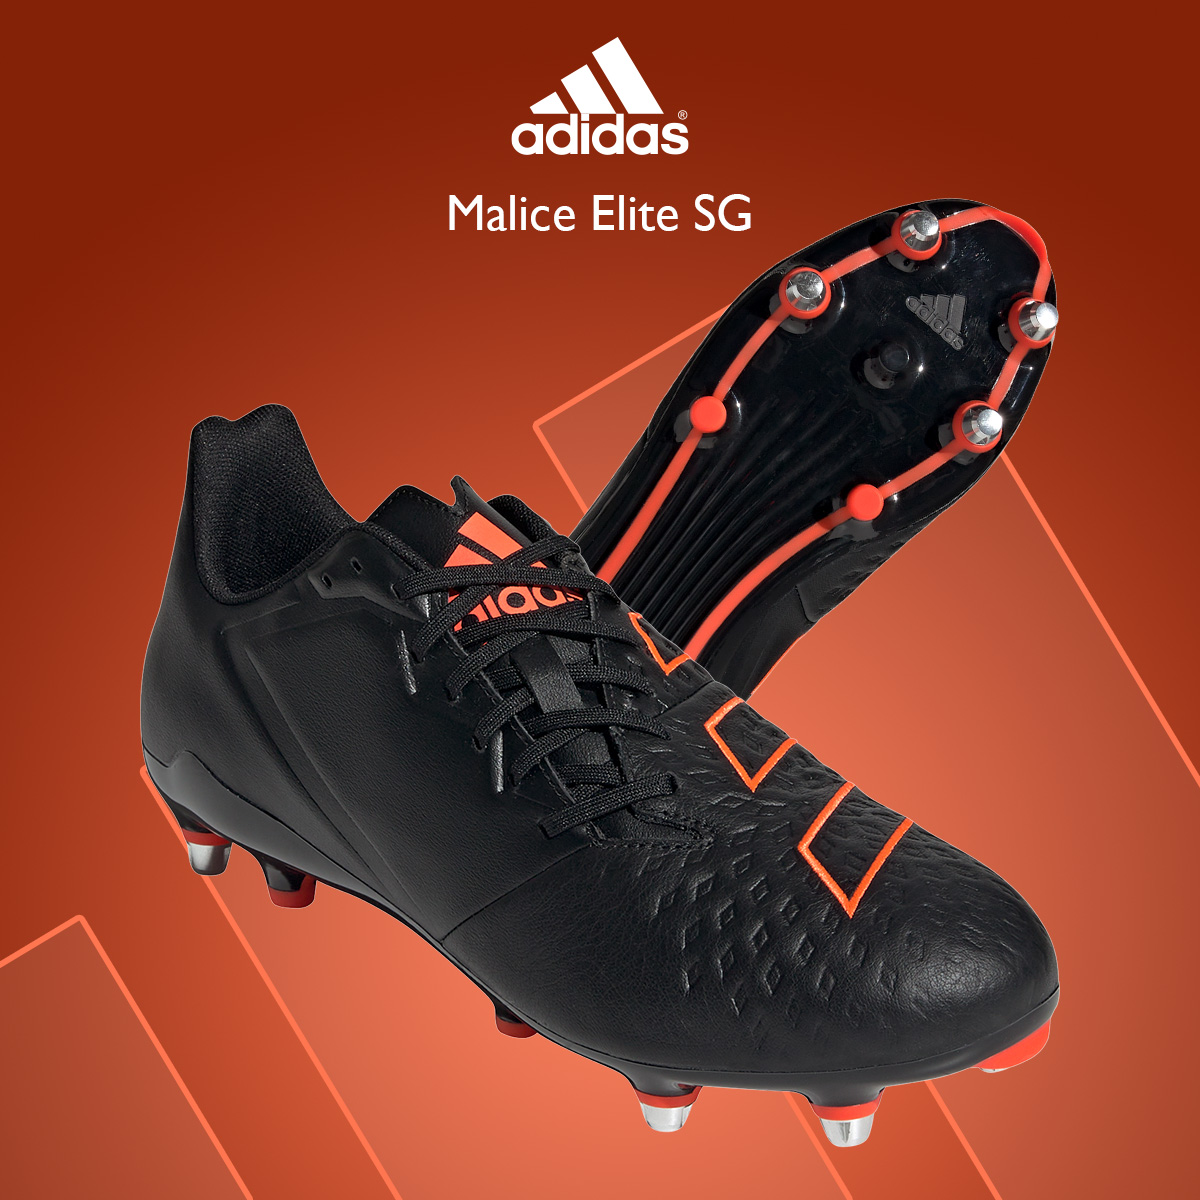 Just Rugby on Twitter: "The Adidas Malice Elite SG gives you lace up for comfort, control and kicking accuracy. The Predator grip element with asymmetric provides control when kicking whatever